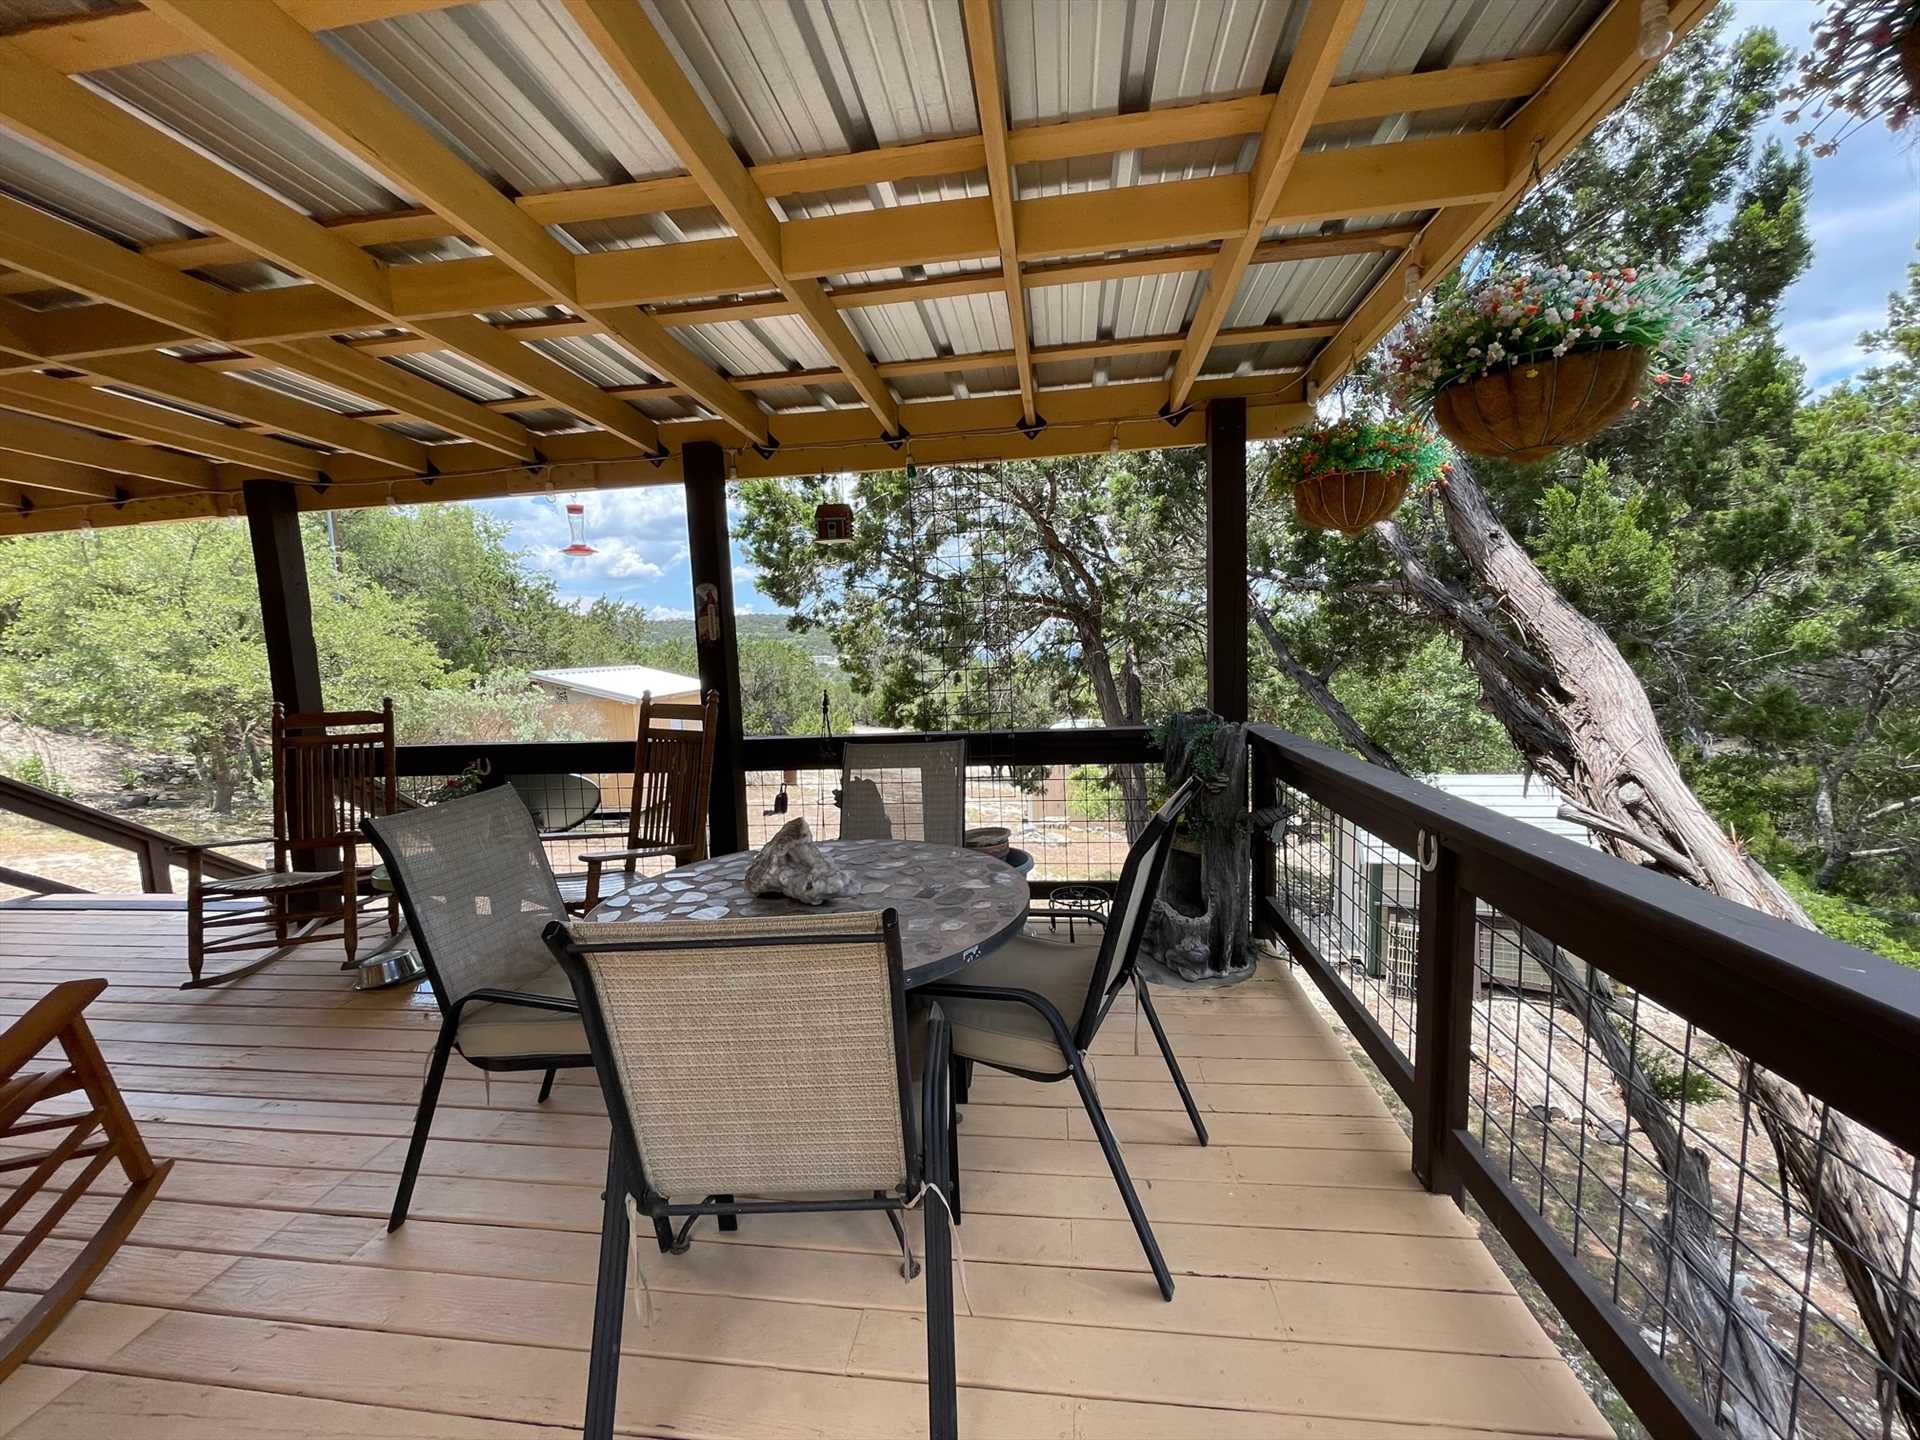                                                 Your elevated view from the shaded deck at Giddy Up gives you a great wildlife watching perch!